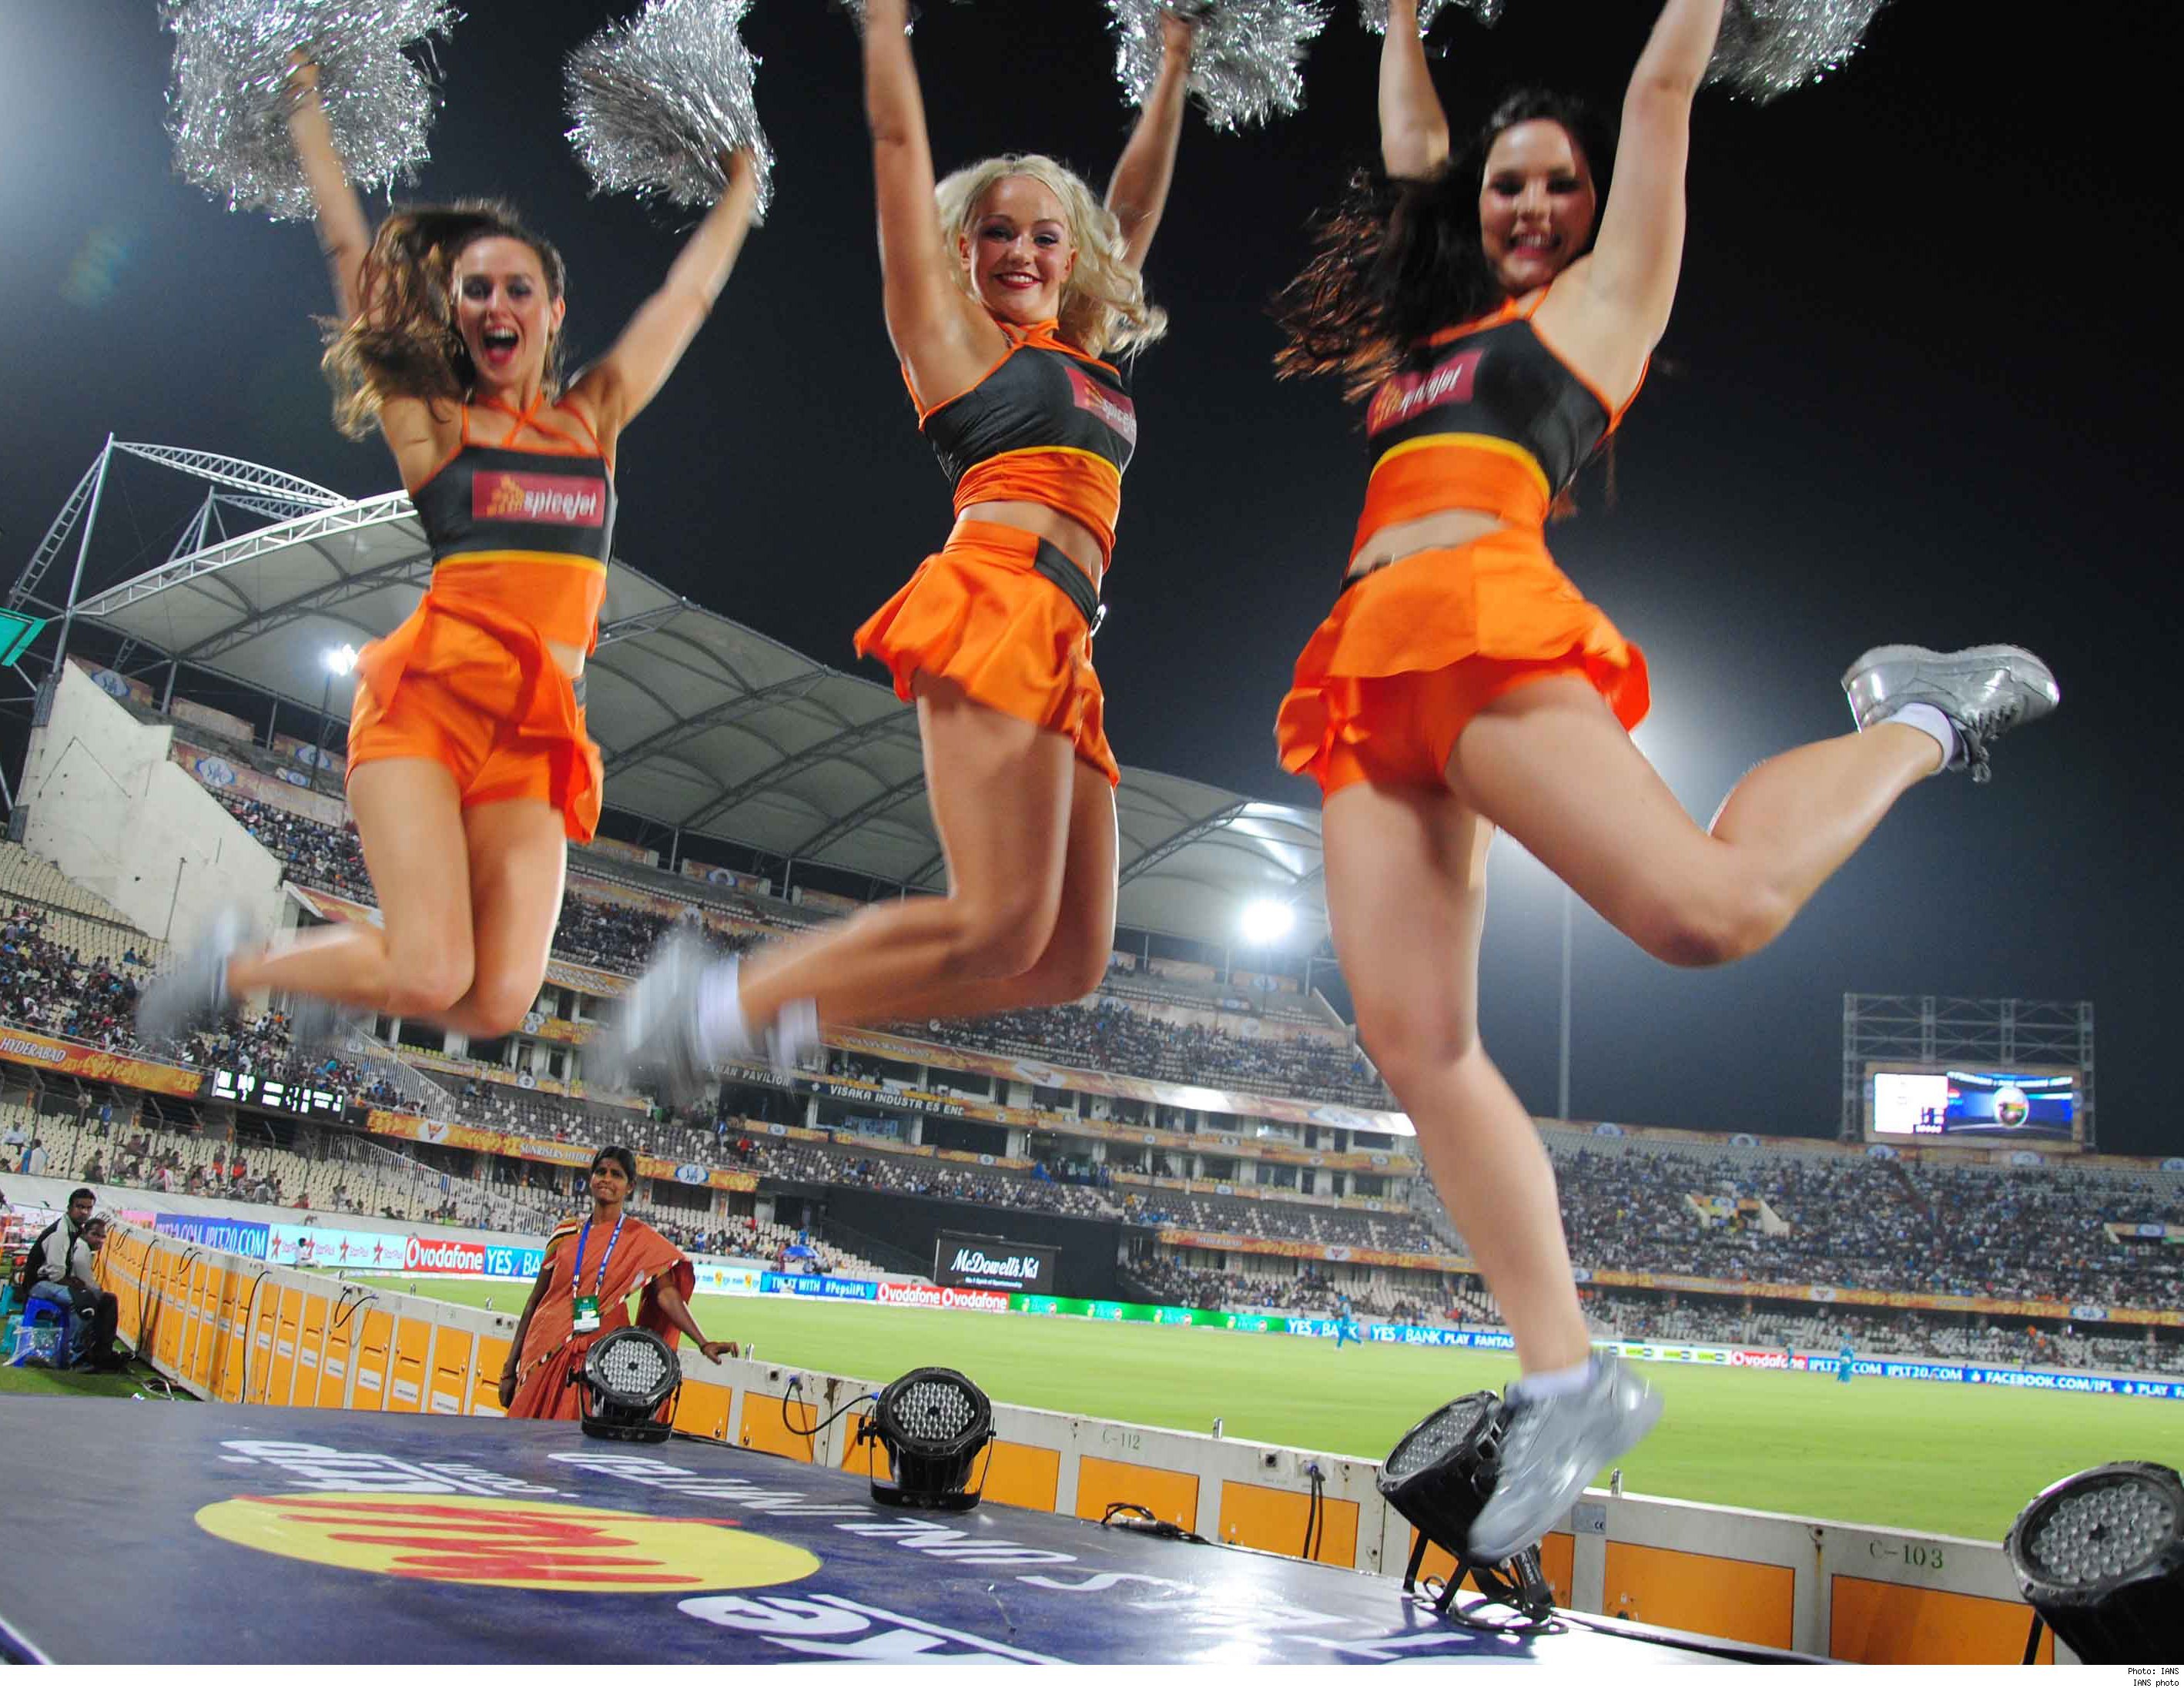 Cheerleaders leaping up high with their pompoms